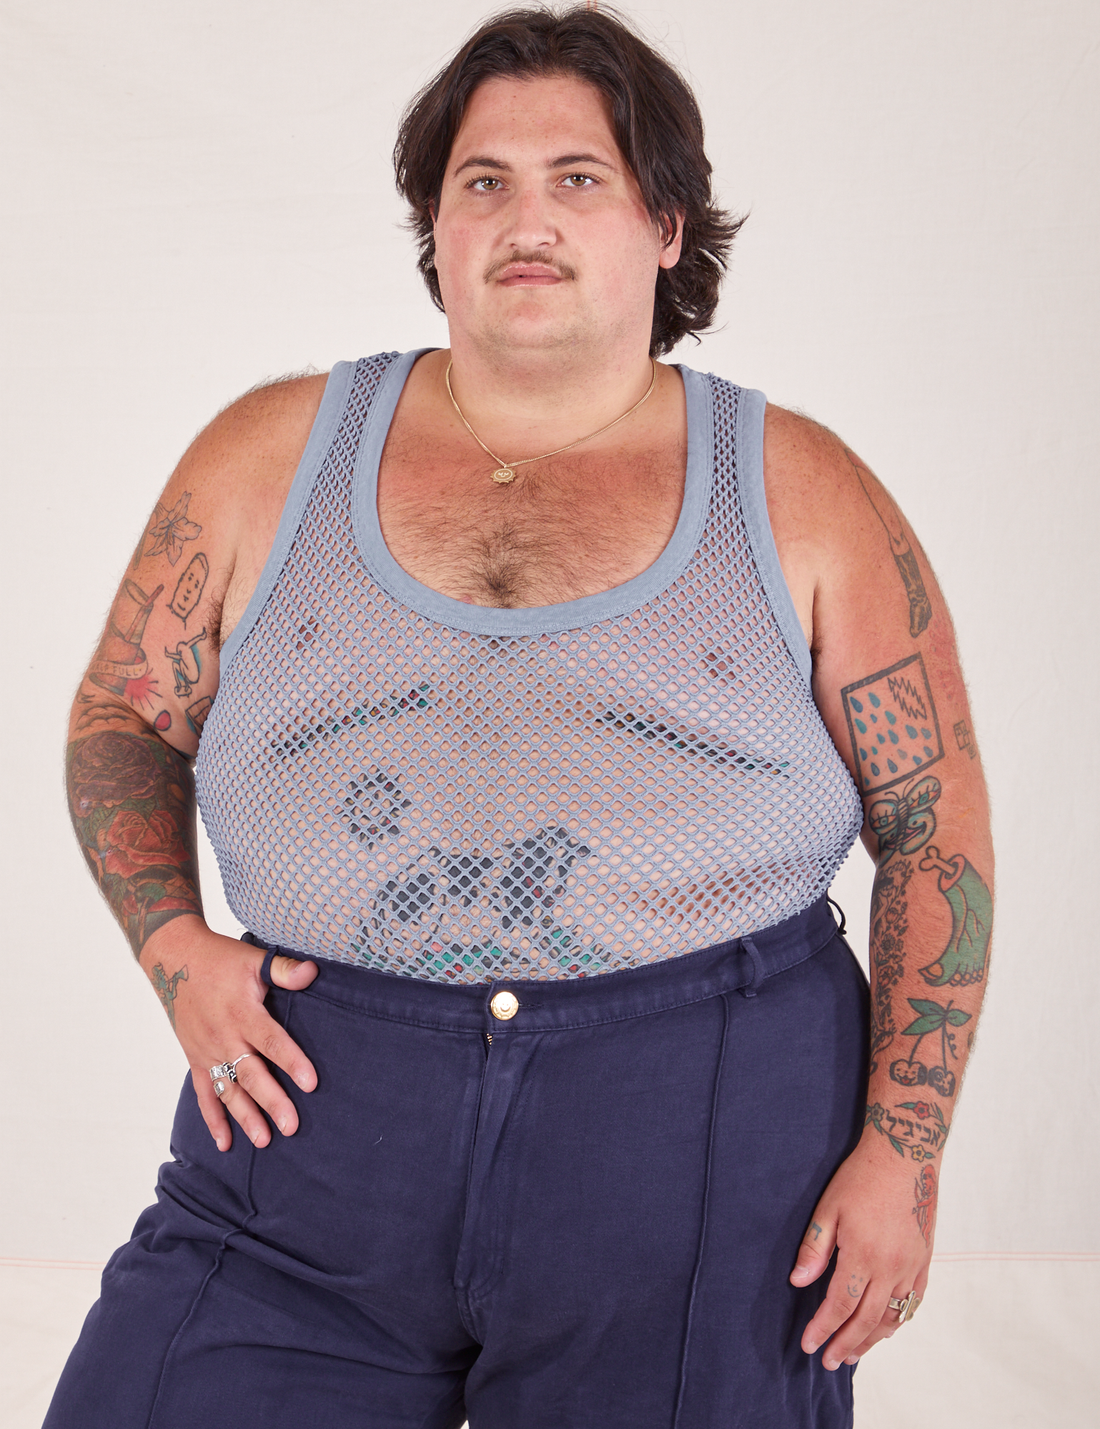 Sam is 5'10" and wearing XL Mesh Tank Top in Periwinkle paired with navy Western Pants